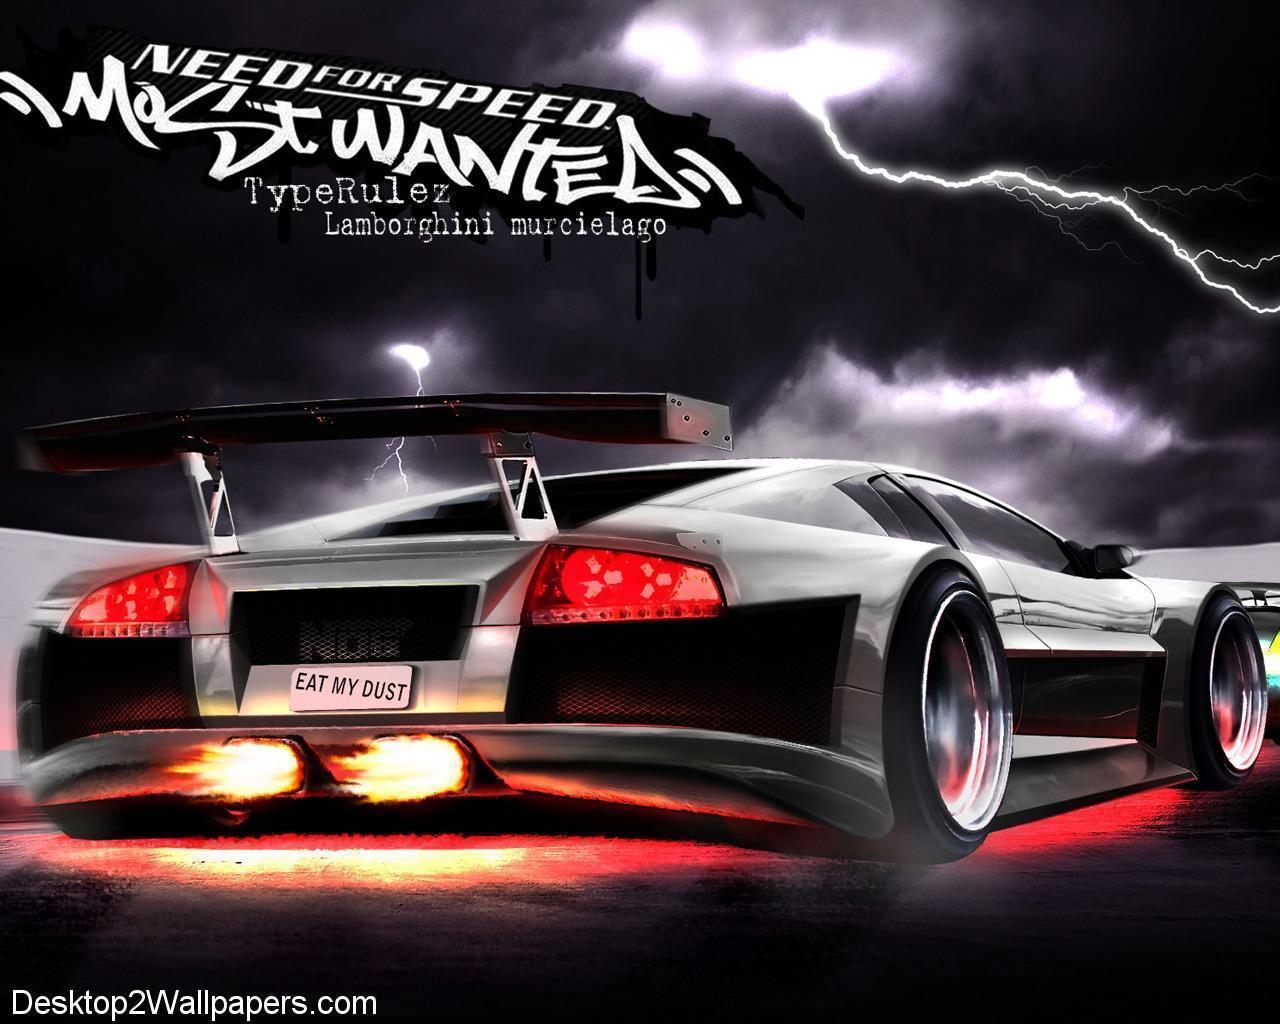 Wallpaper Need For Speed Shift Original Image Browser